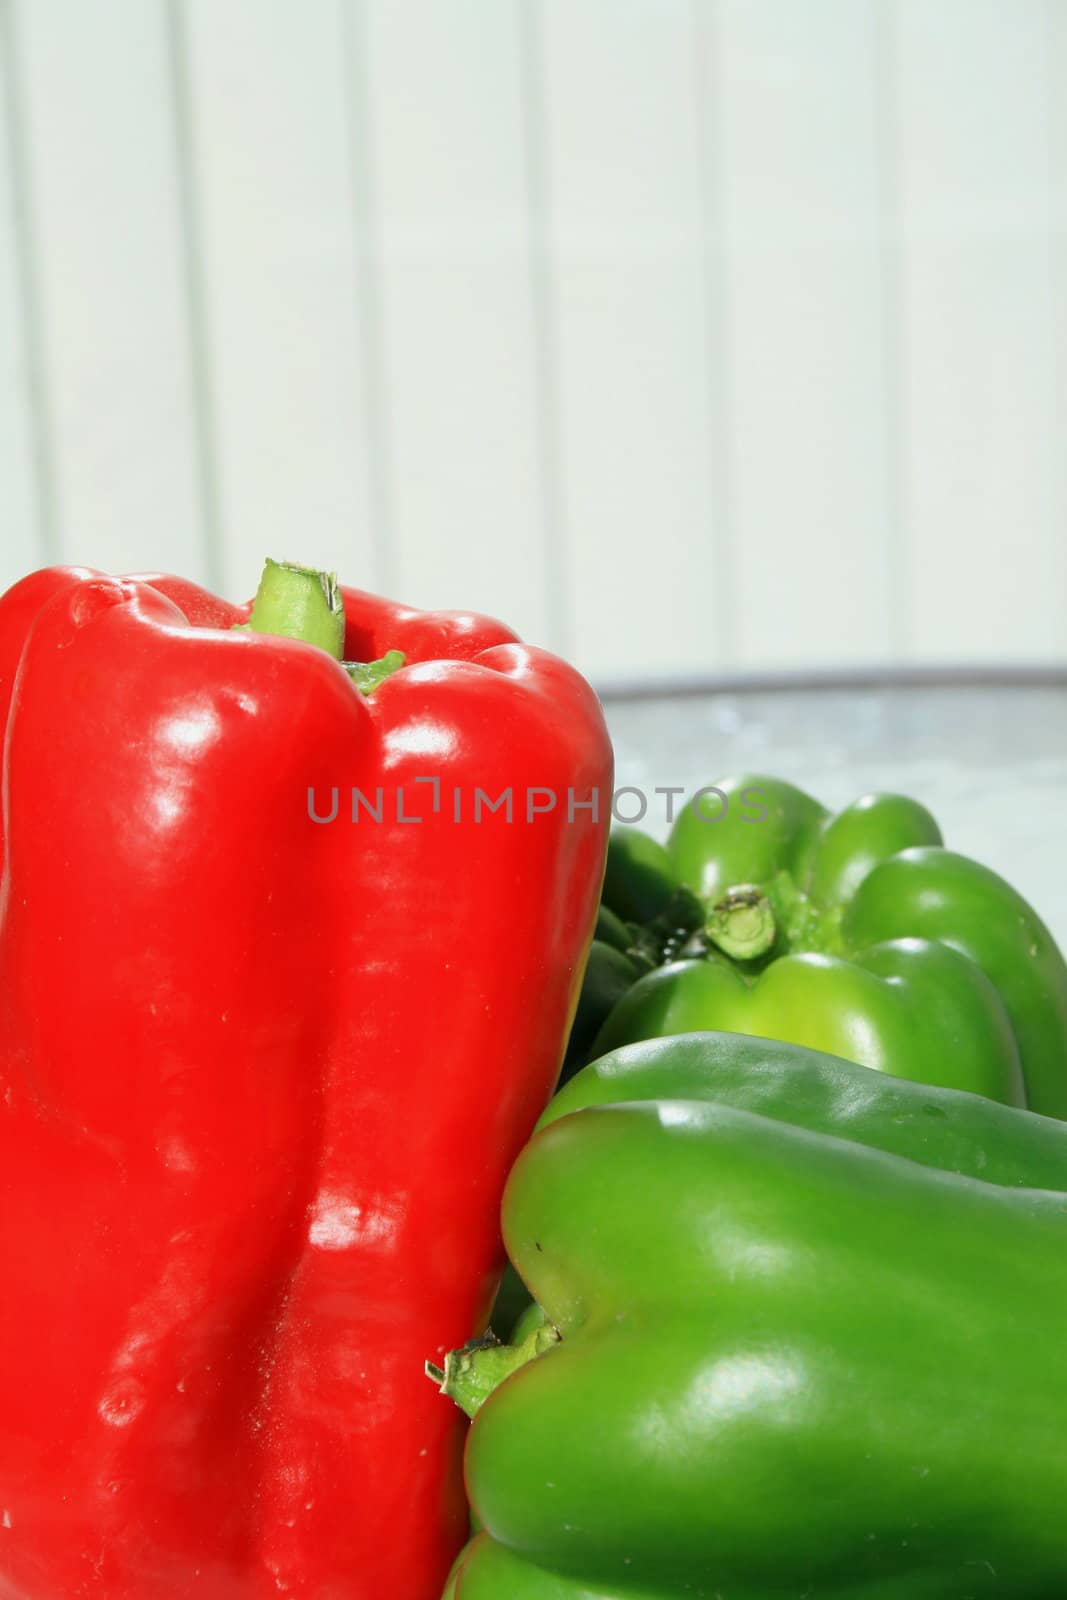 Close up of the red and green bell peppers on a plate.